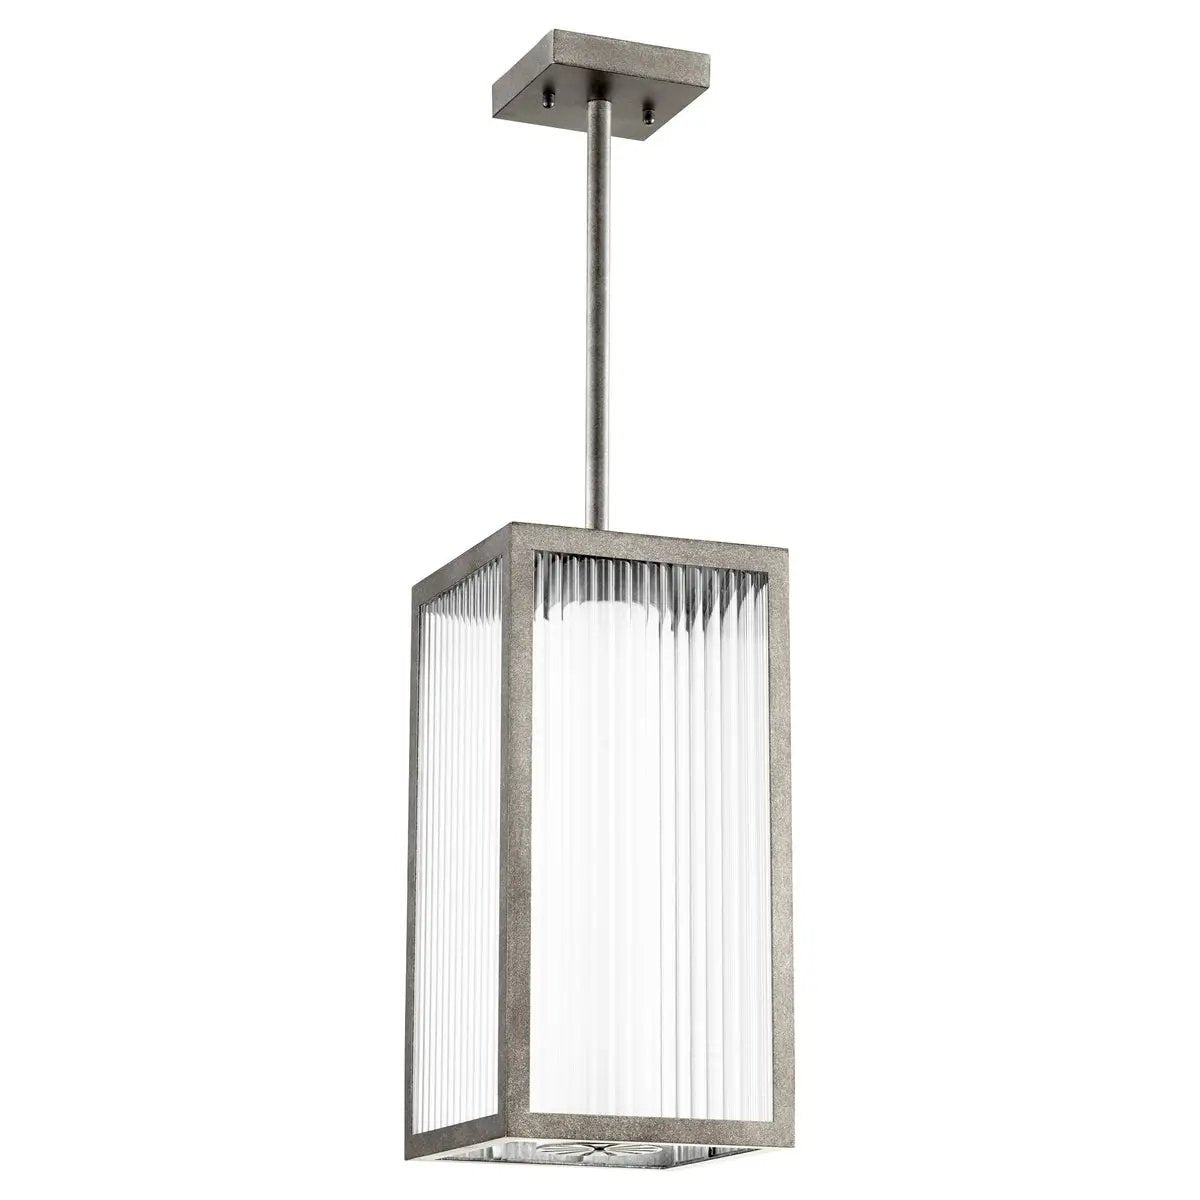 Outdoor Modern Pendant Light with sleek design, frosted shade, and clear fluted glass exterior. 3 dimmable LED light sources. Perfect for covered patio.